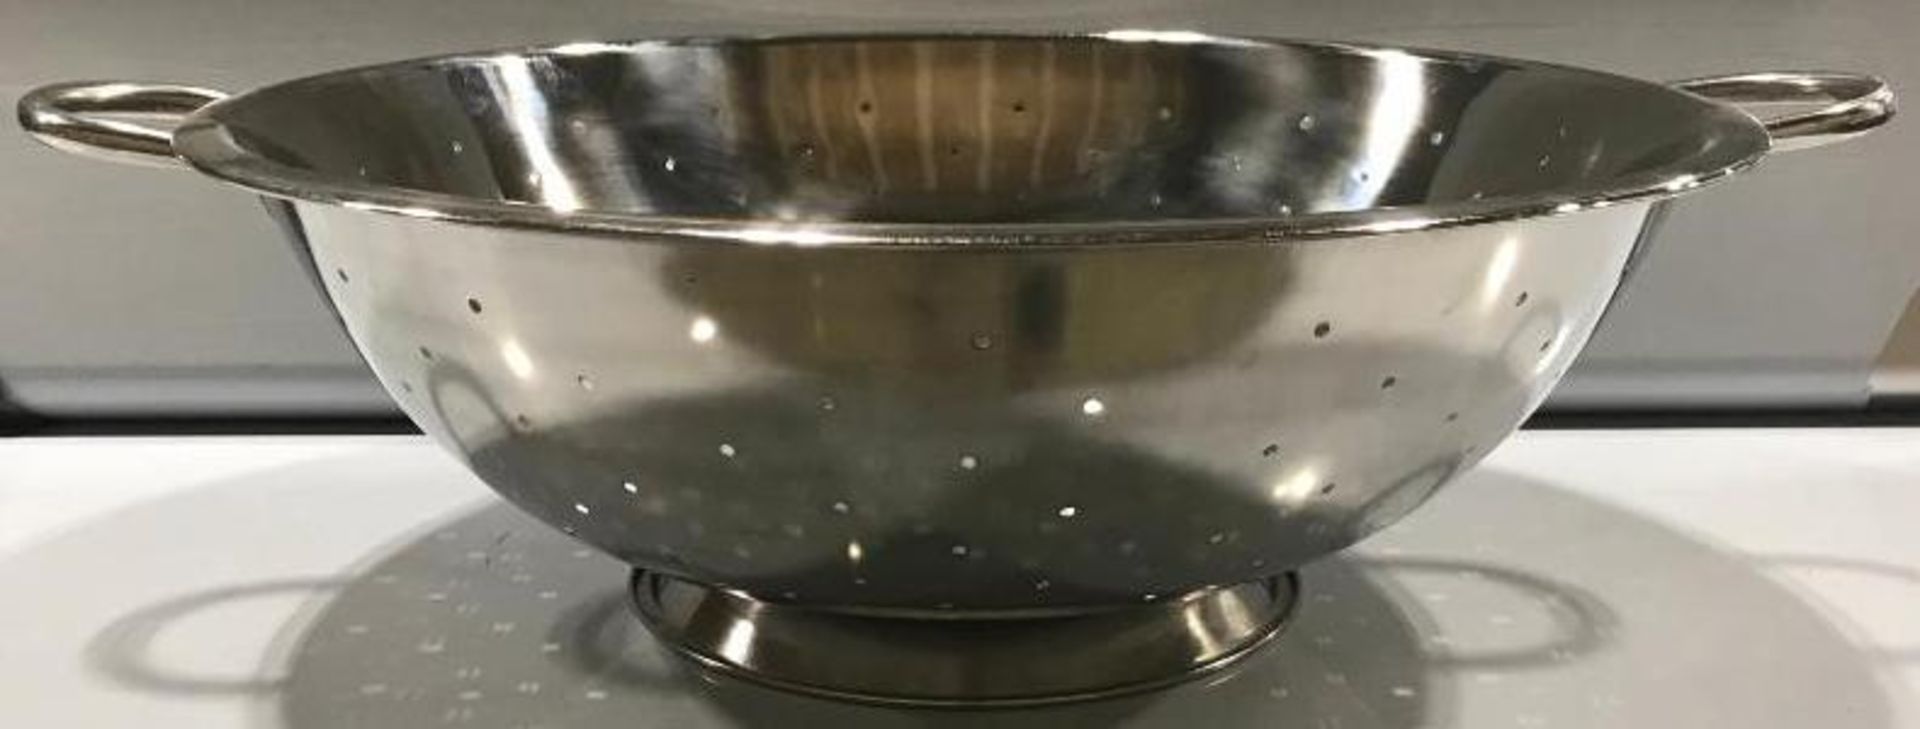 WINCO 14QT (16.5") STAINLESS STEEL COLANDER, WINCO C0D14 - NEW - Image 2 of 3